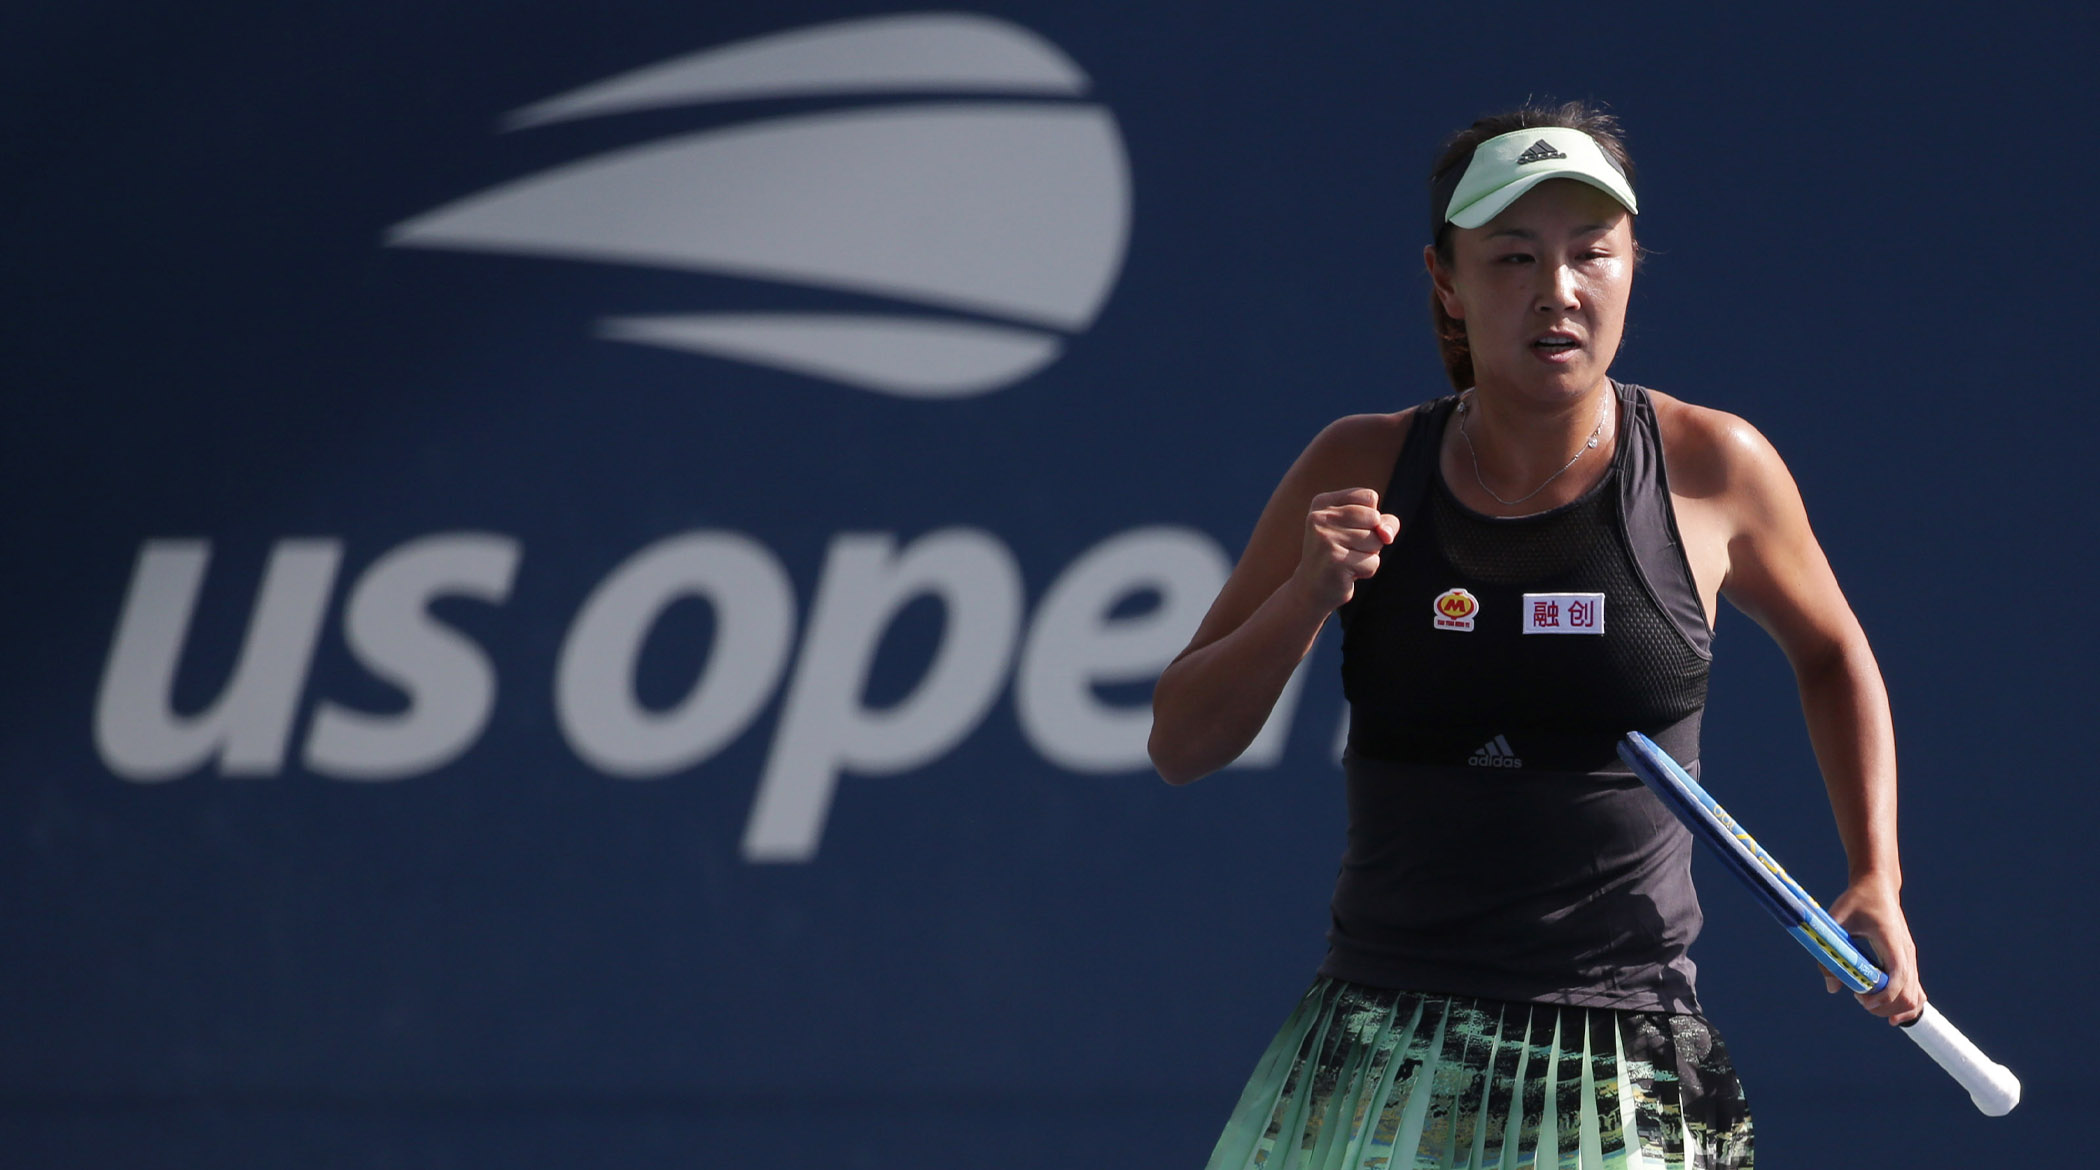 Aug 26, 2019; Flushing, NY, USA; Shuai Peng of China reacts after winning a point against Varvara Lepchenko of the United States in a first round match on day one of the 2019 U.S. Open tennis tournament at USTA Billie Jean King National Tennis Center.